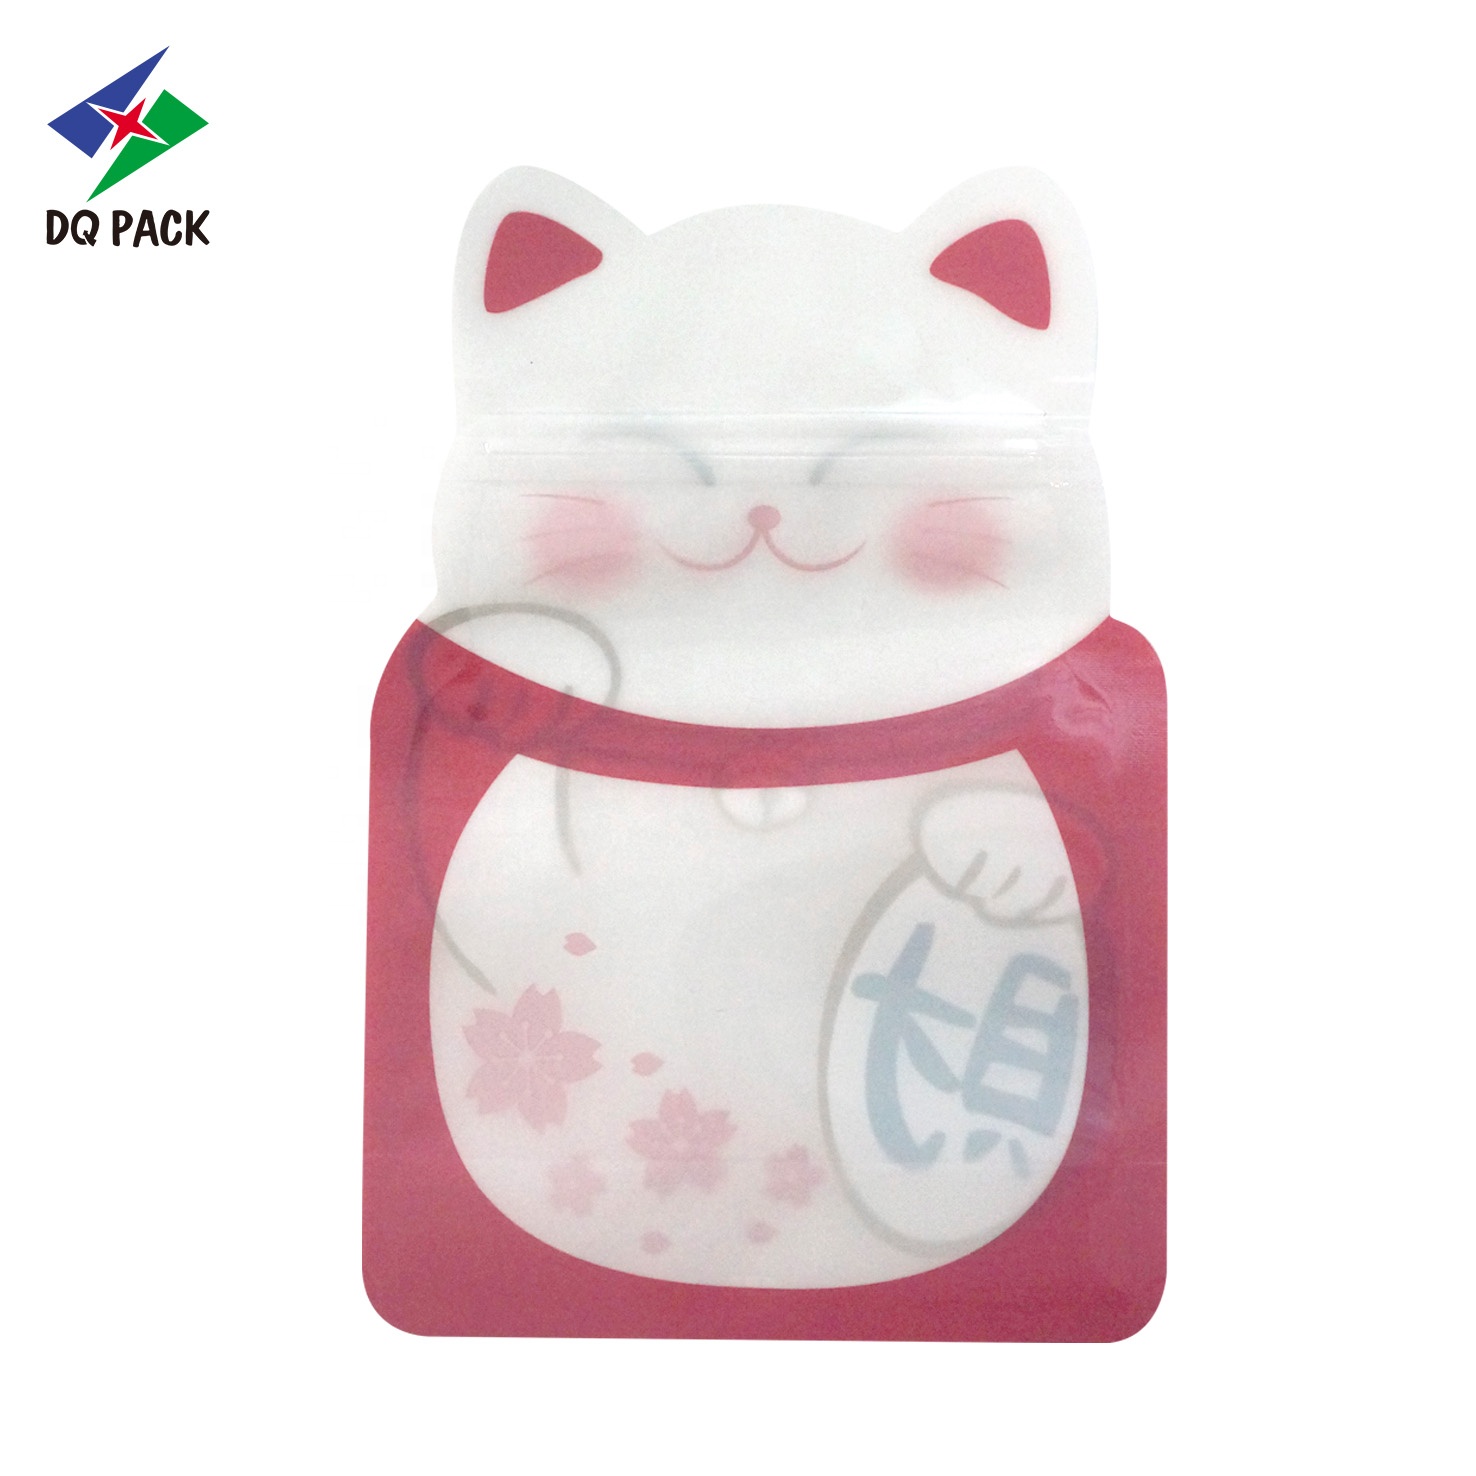 DQ PACK custom animal shape candy confectionery snack transsparent opp bag